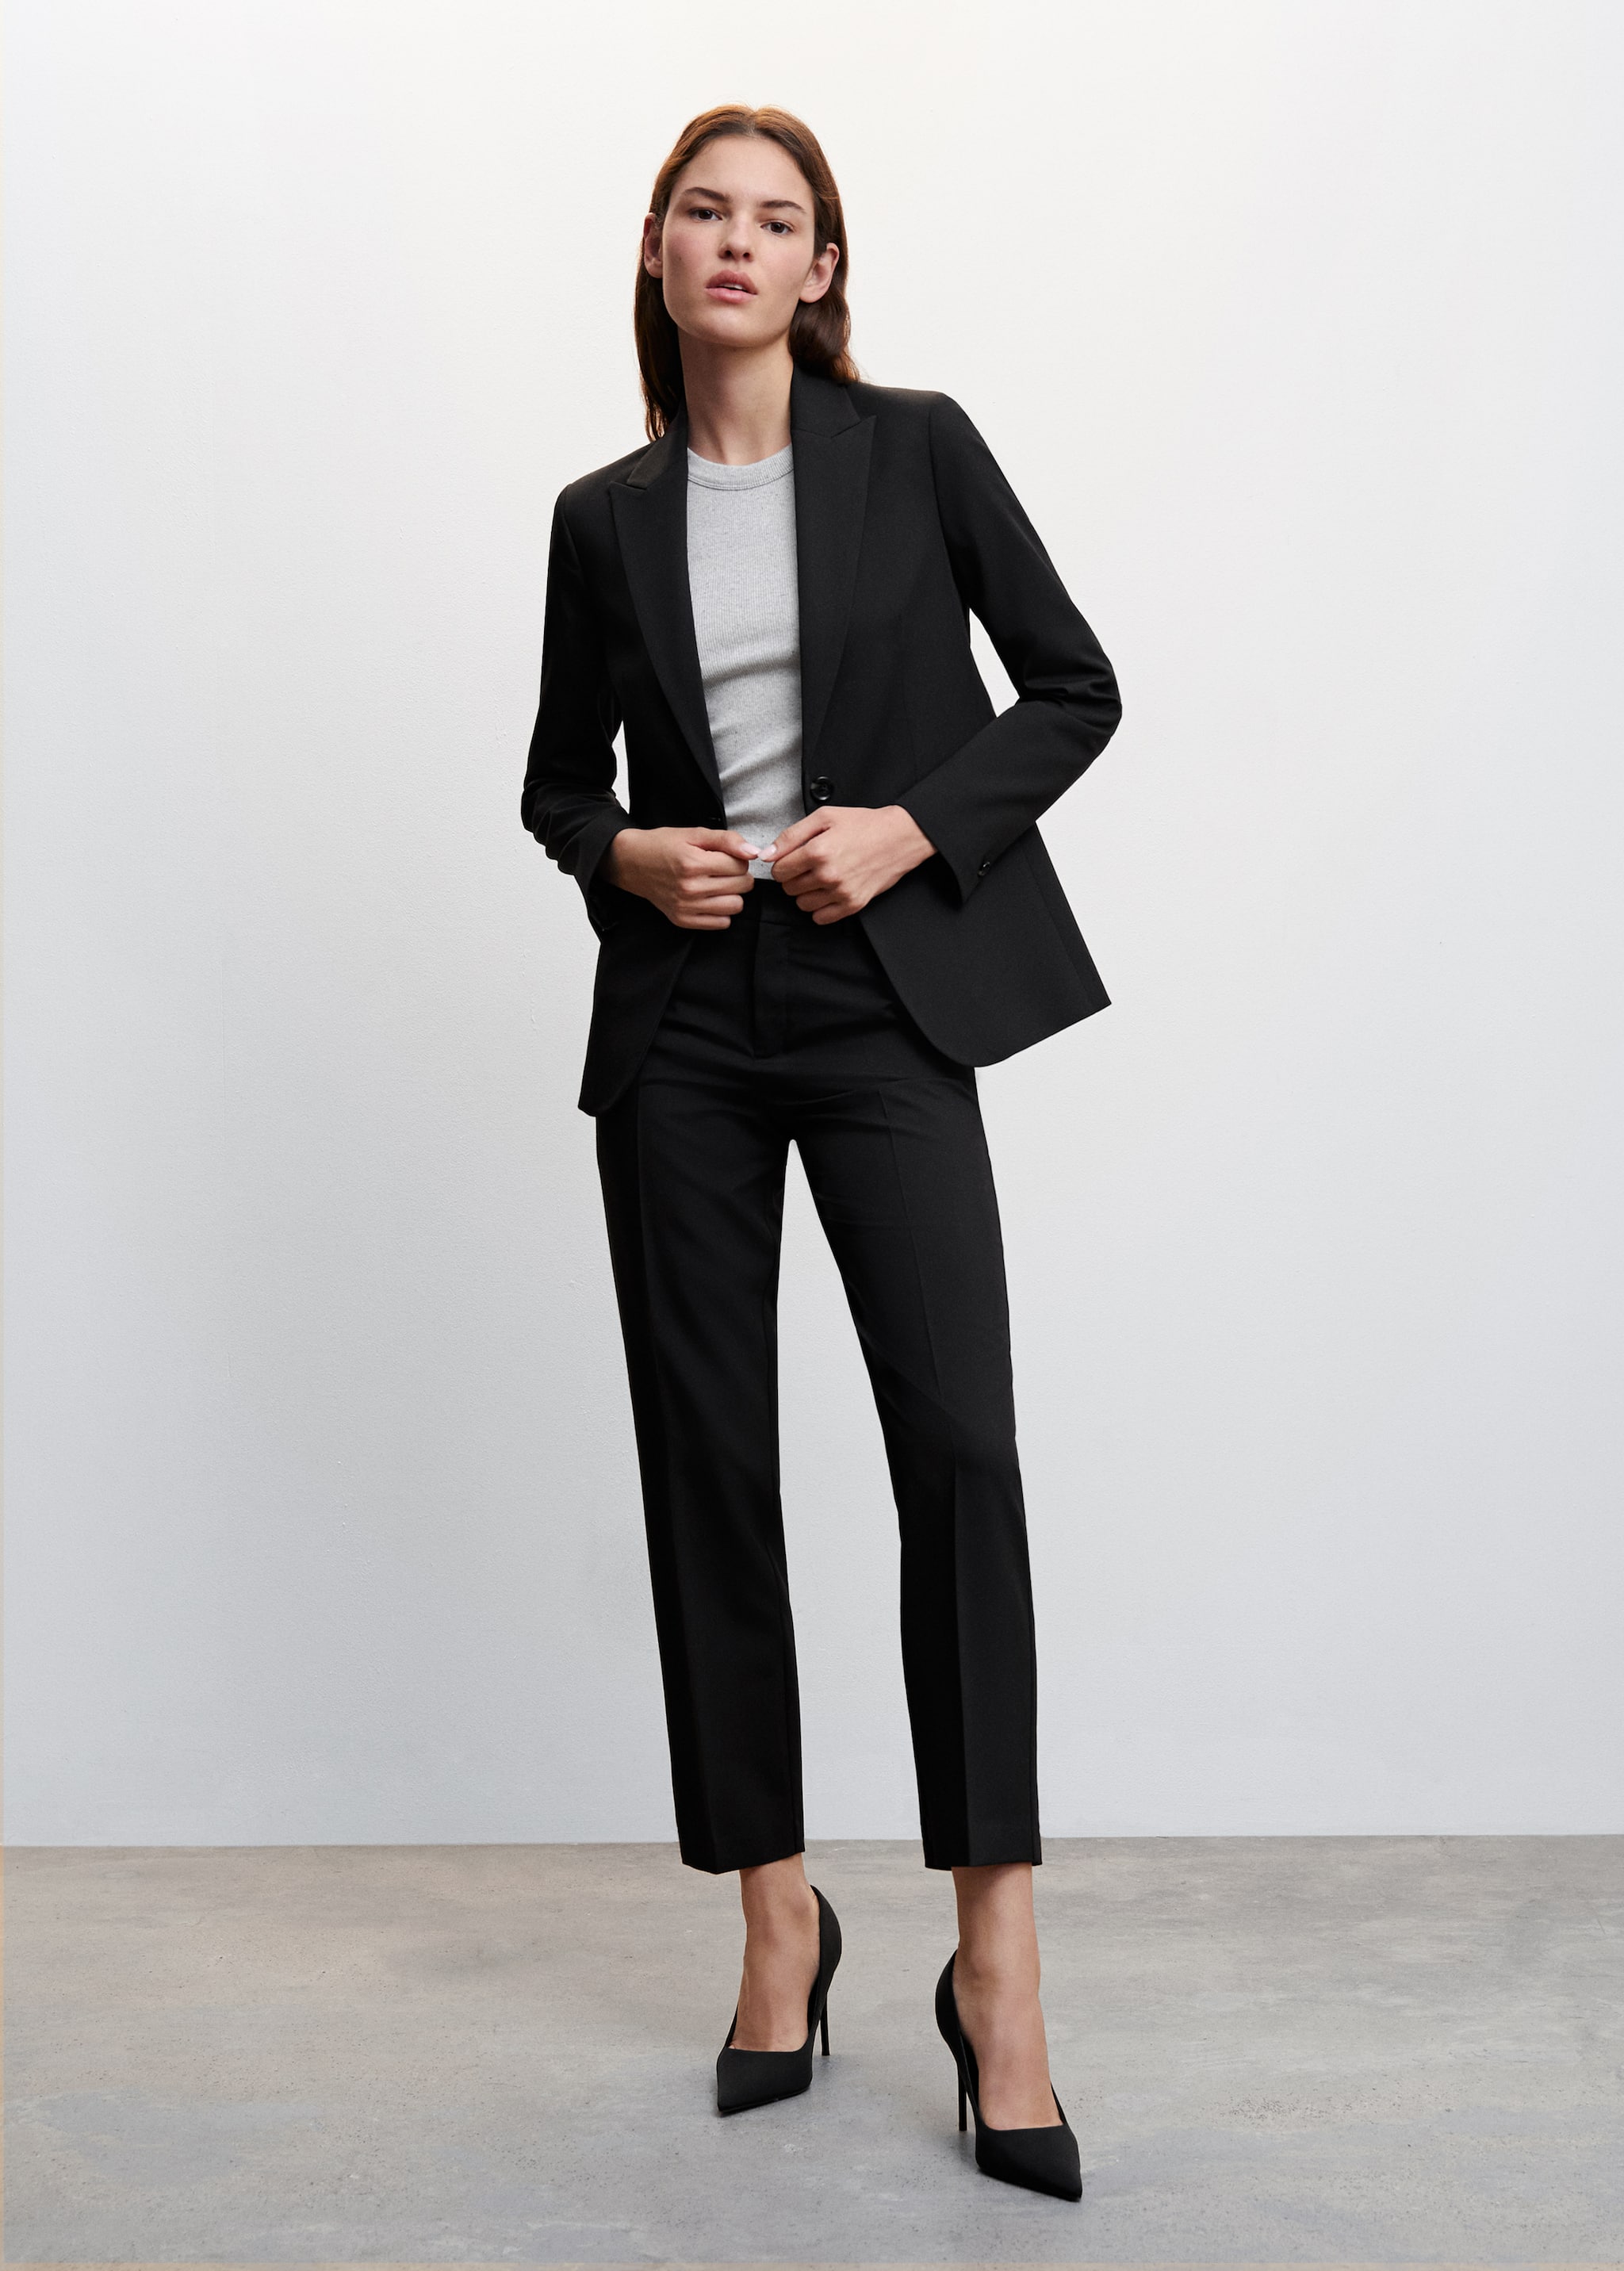 Fitted suit jacket - General plane